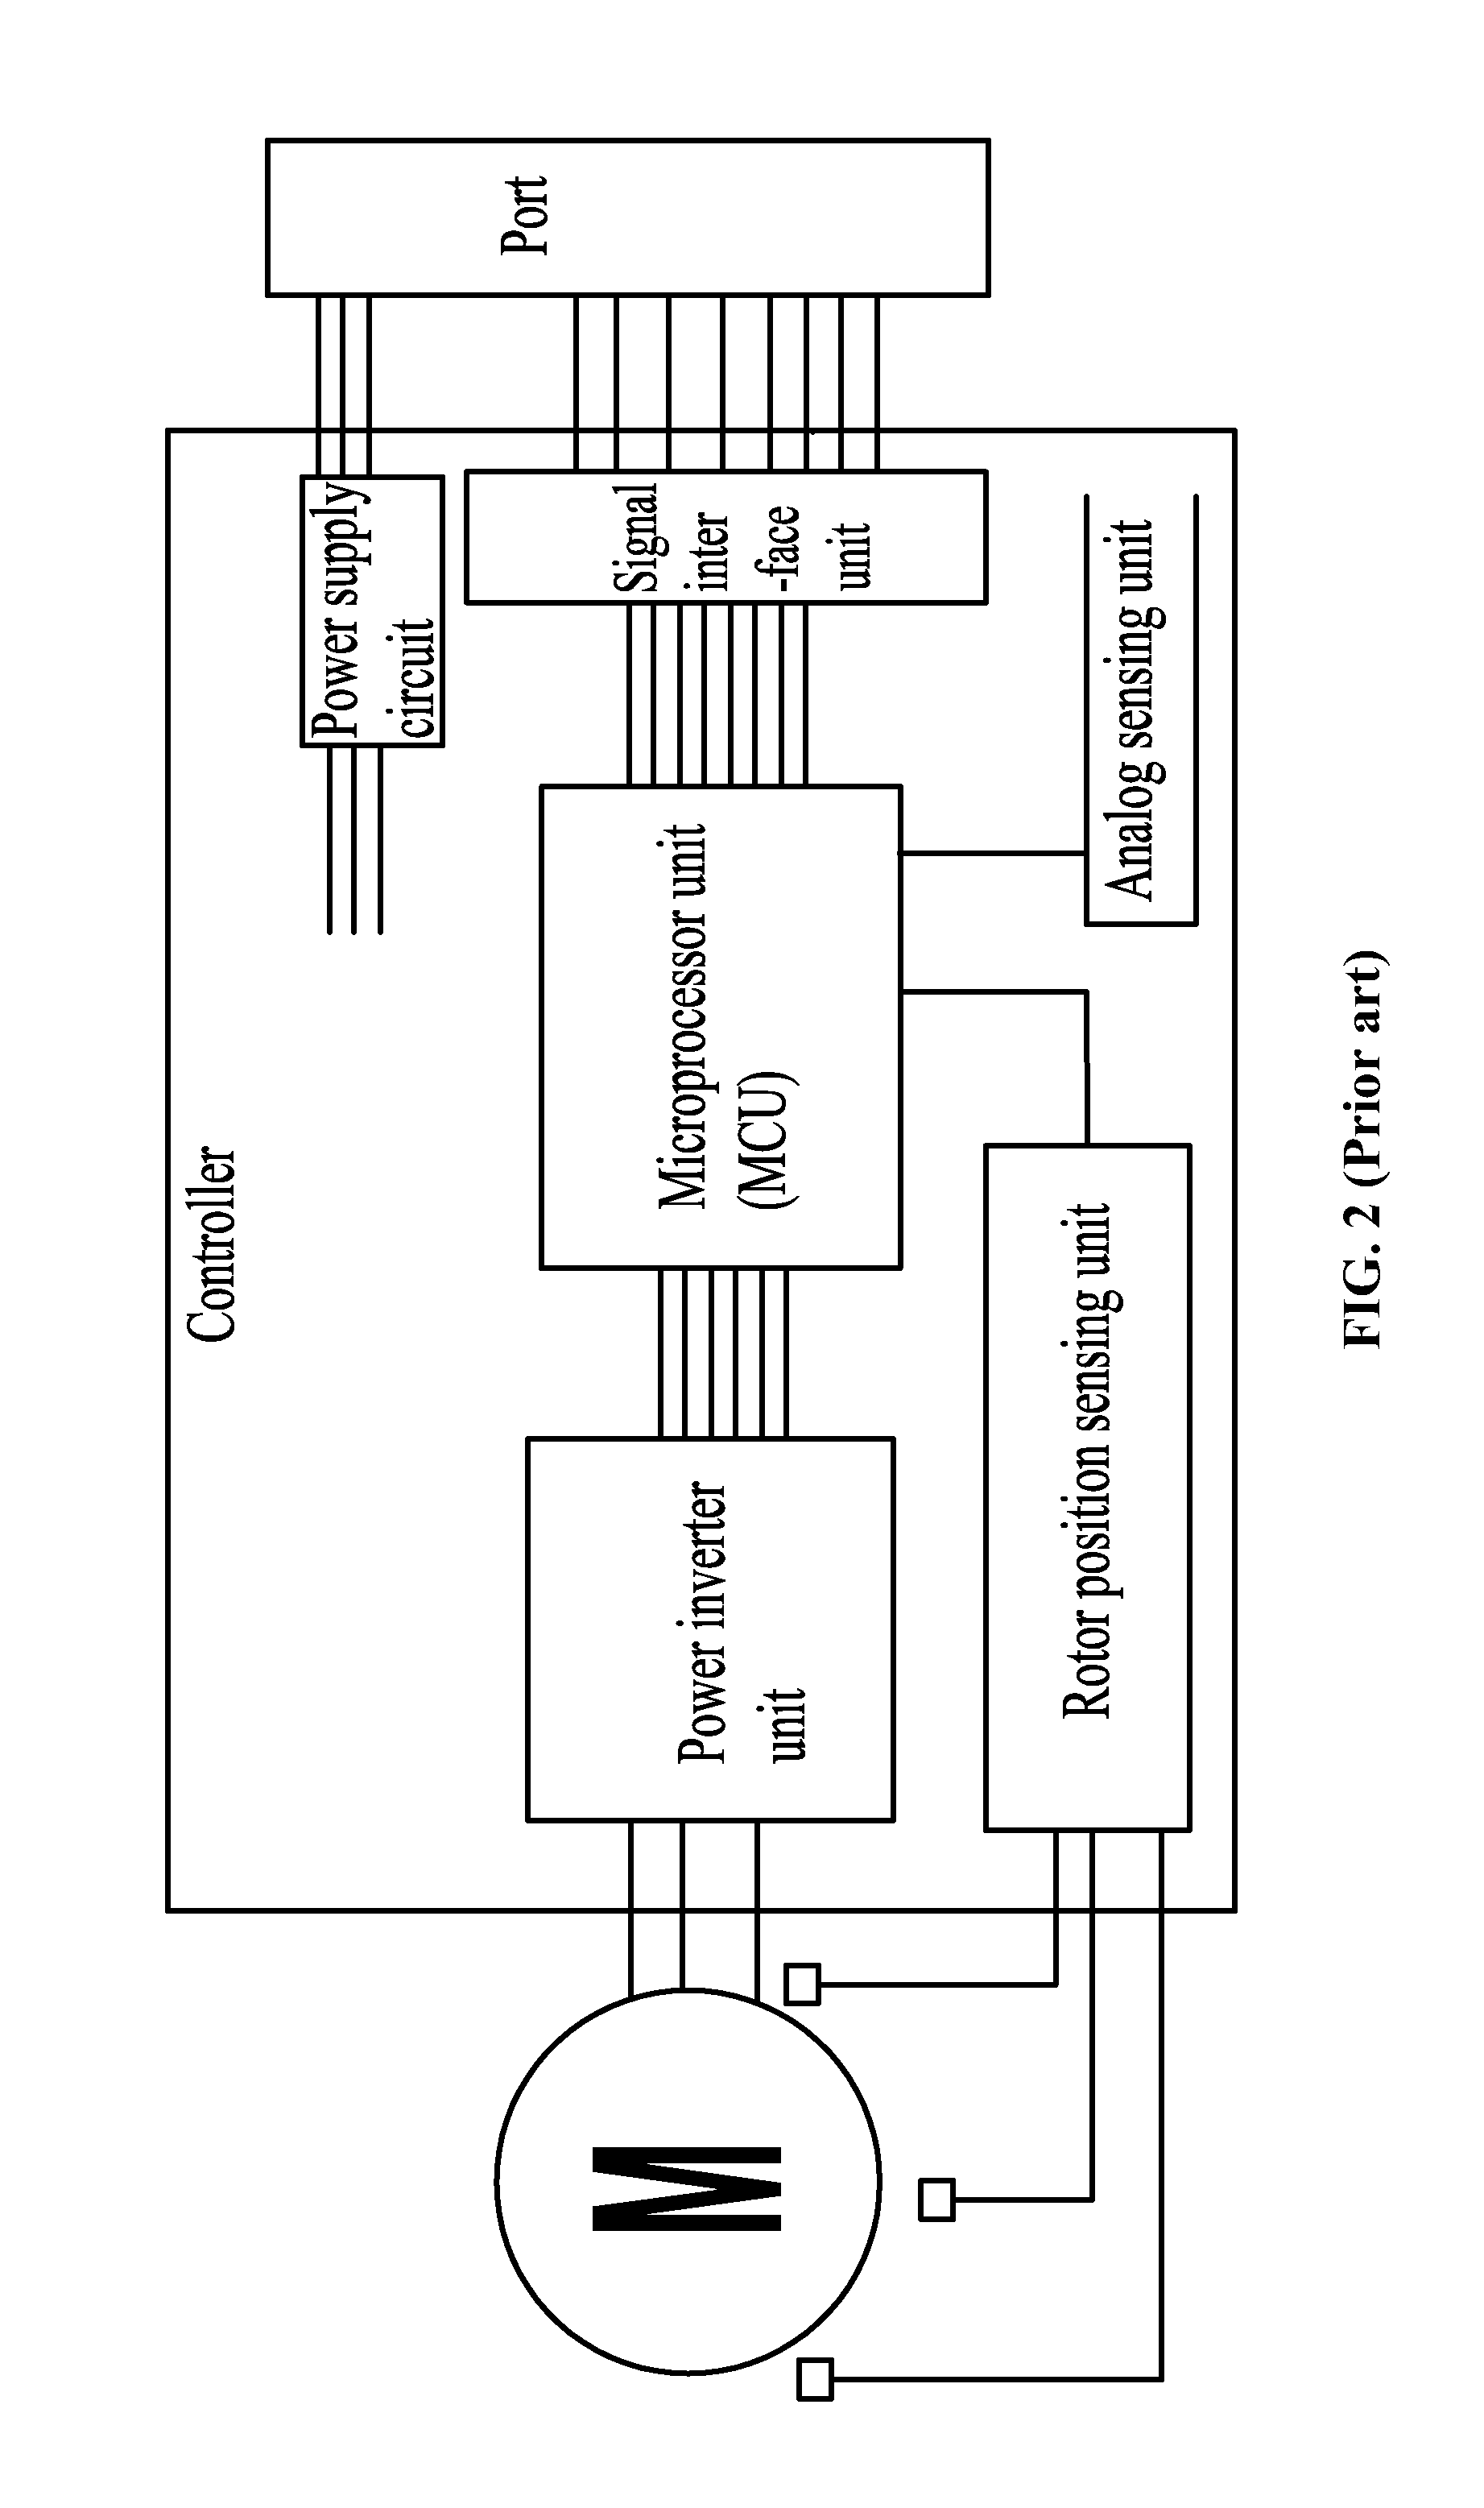 Daughter circuit board of electronically commutated motor for interface signal conversion